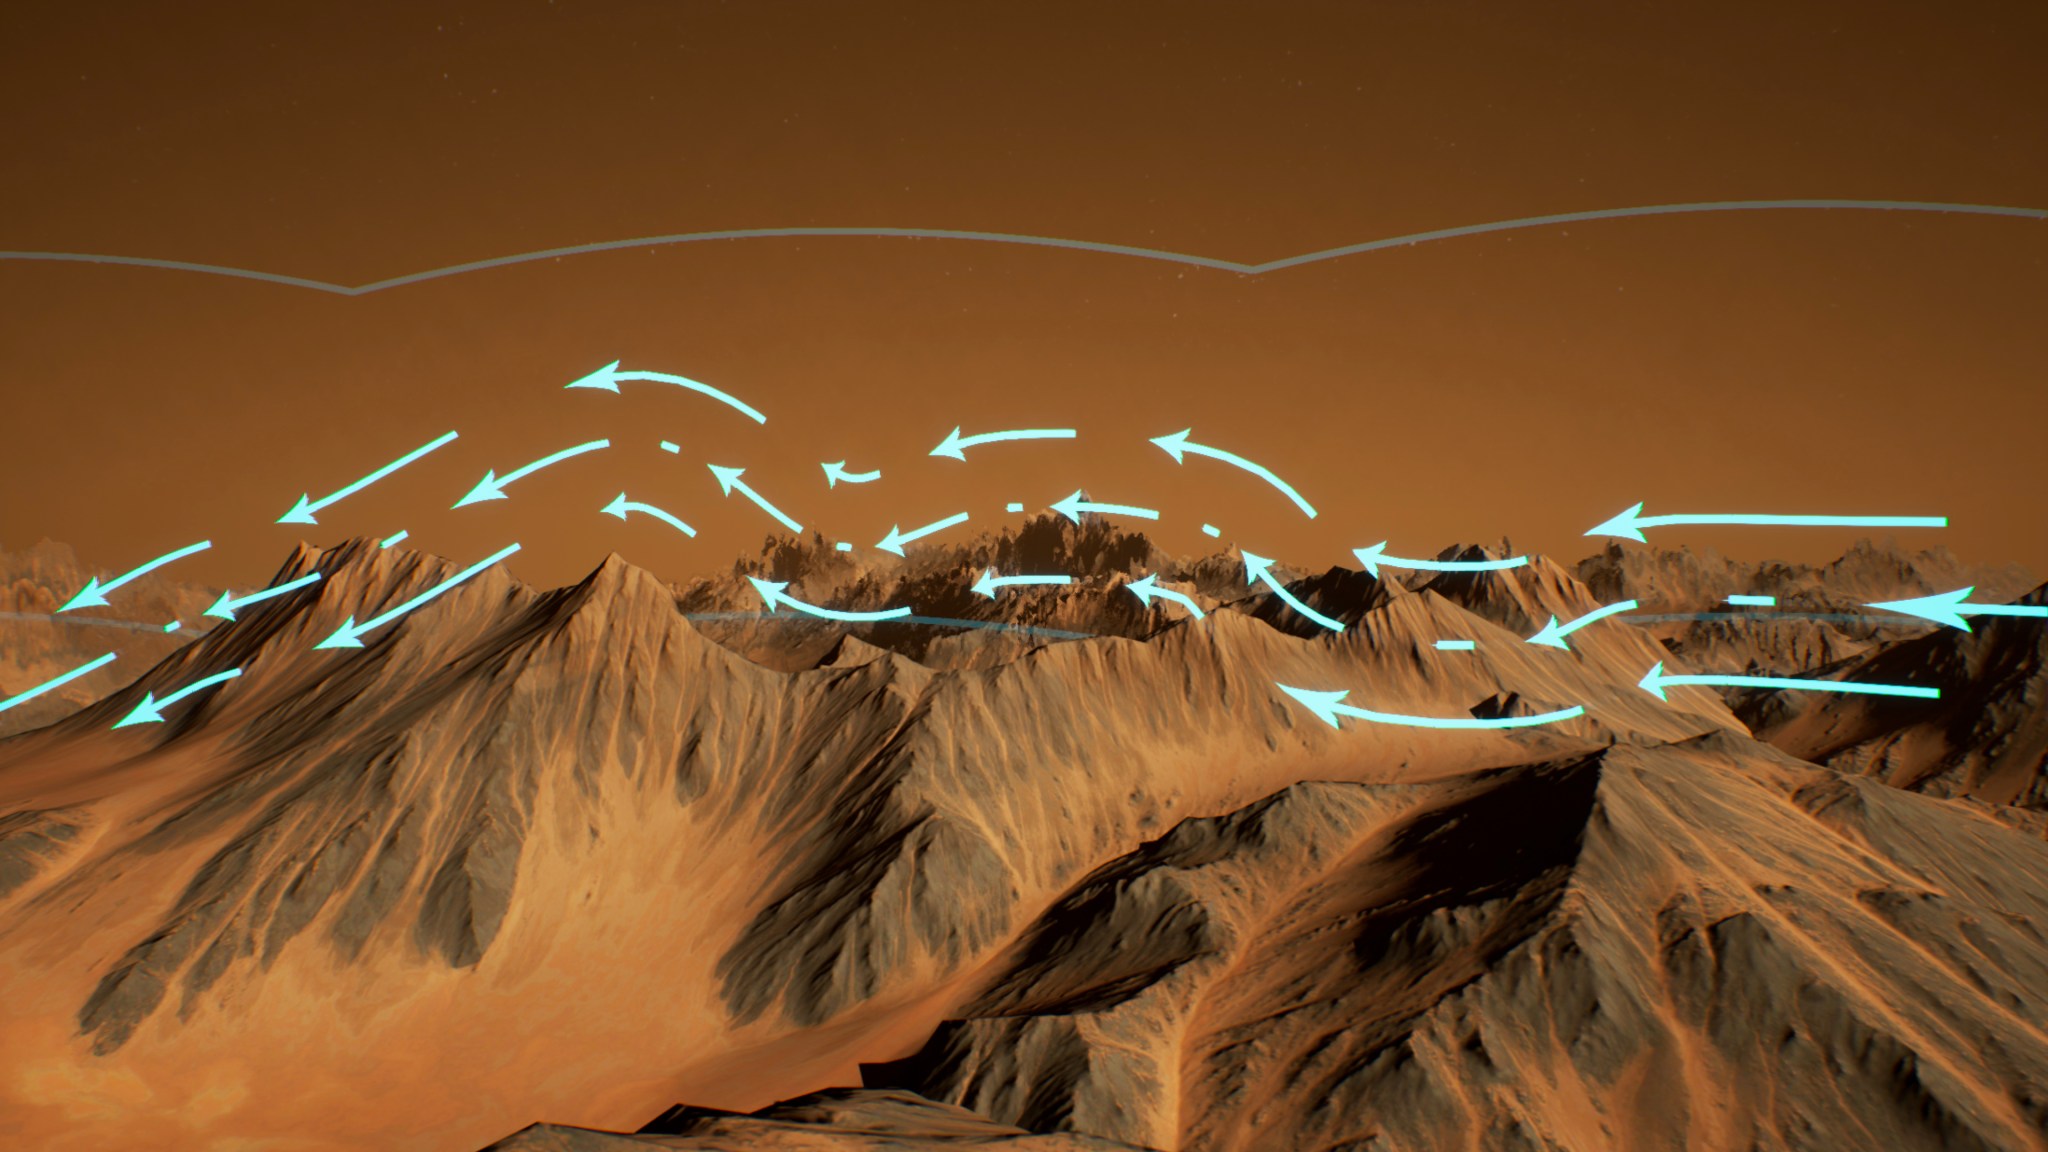 Conceptual image of surface winds generating gravity waves